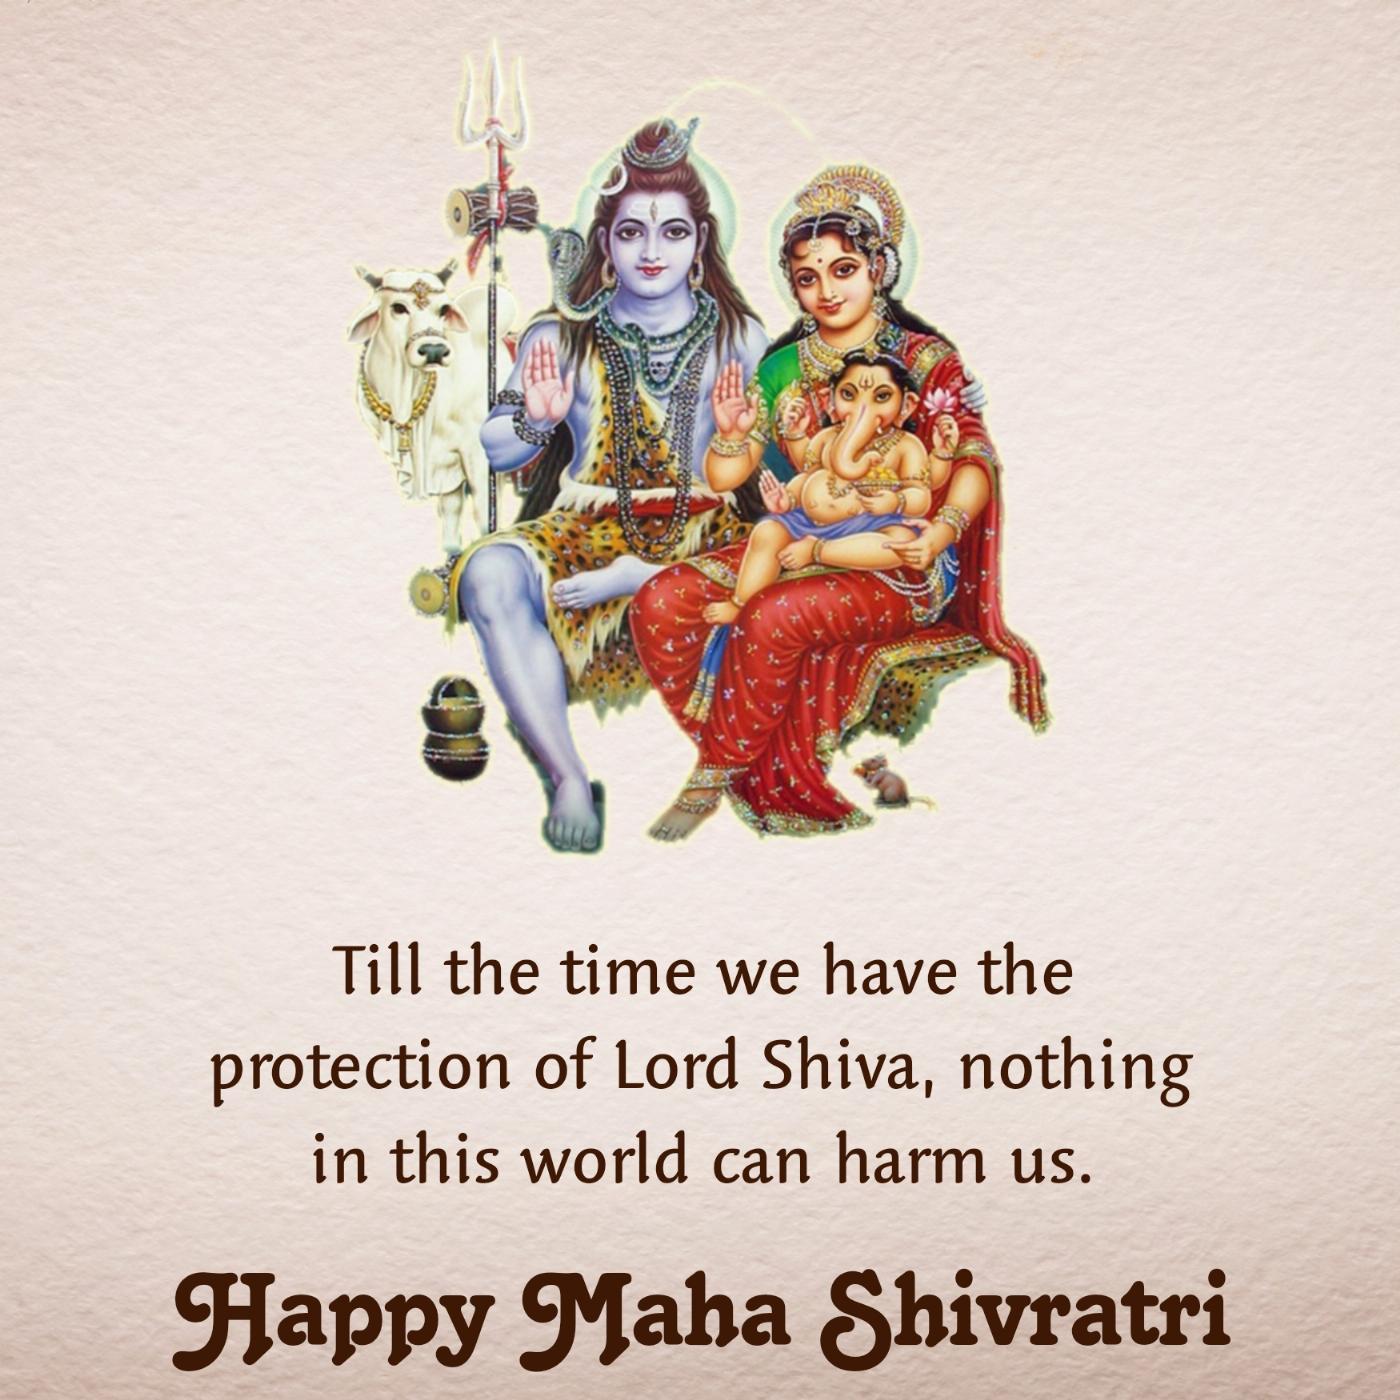 Till the time we have the protection of Lord Shiva